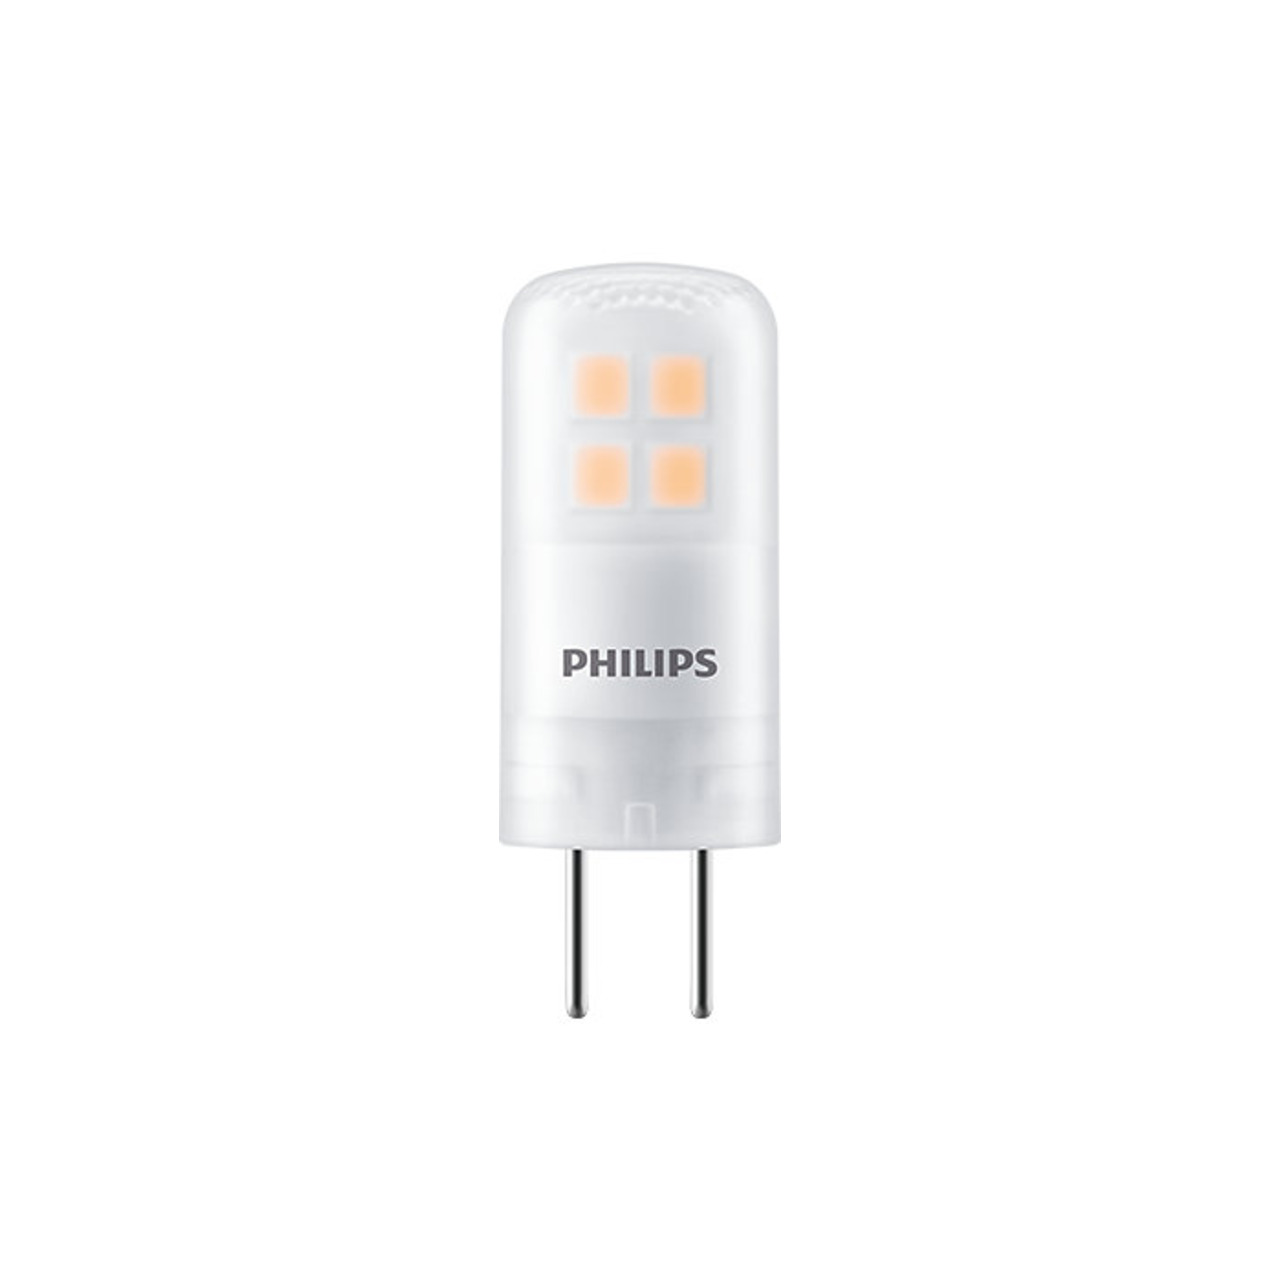 Philips 1-8-W-GY6-35-LED-Lampe CorePro LEDcapsule 205 lm- nicht dimmbar- warmweiss unter Beleuchtung